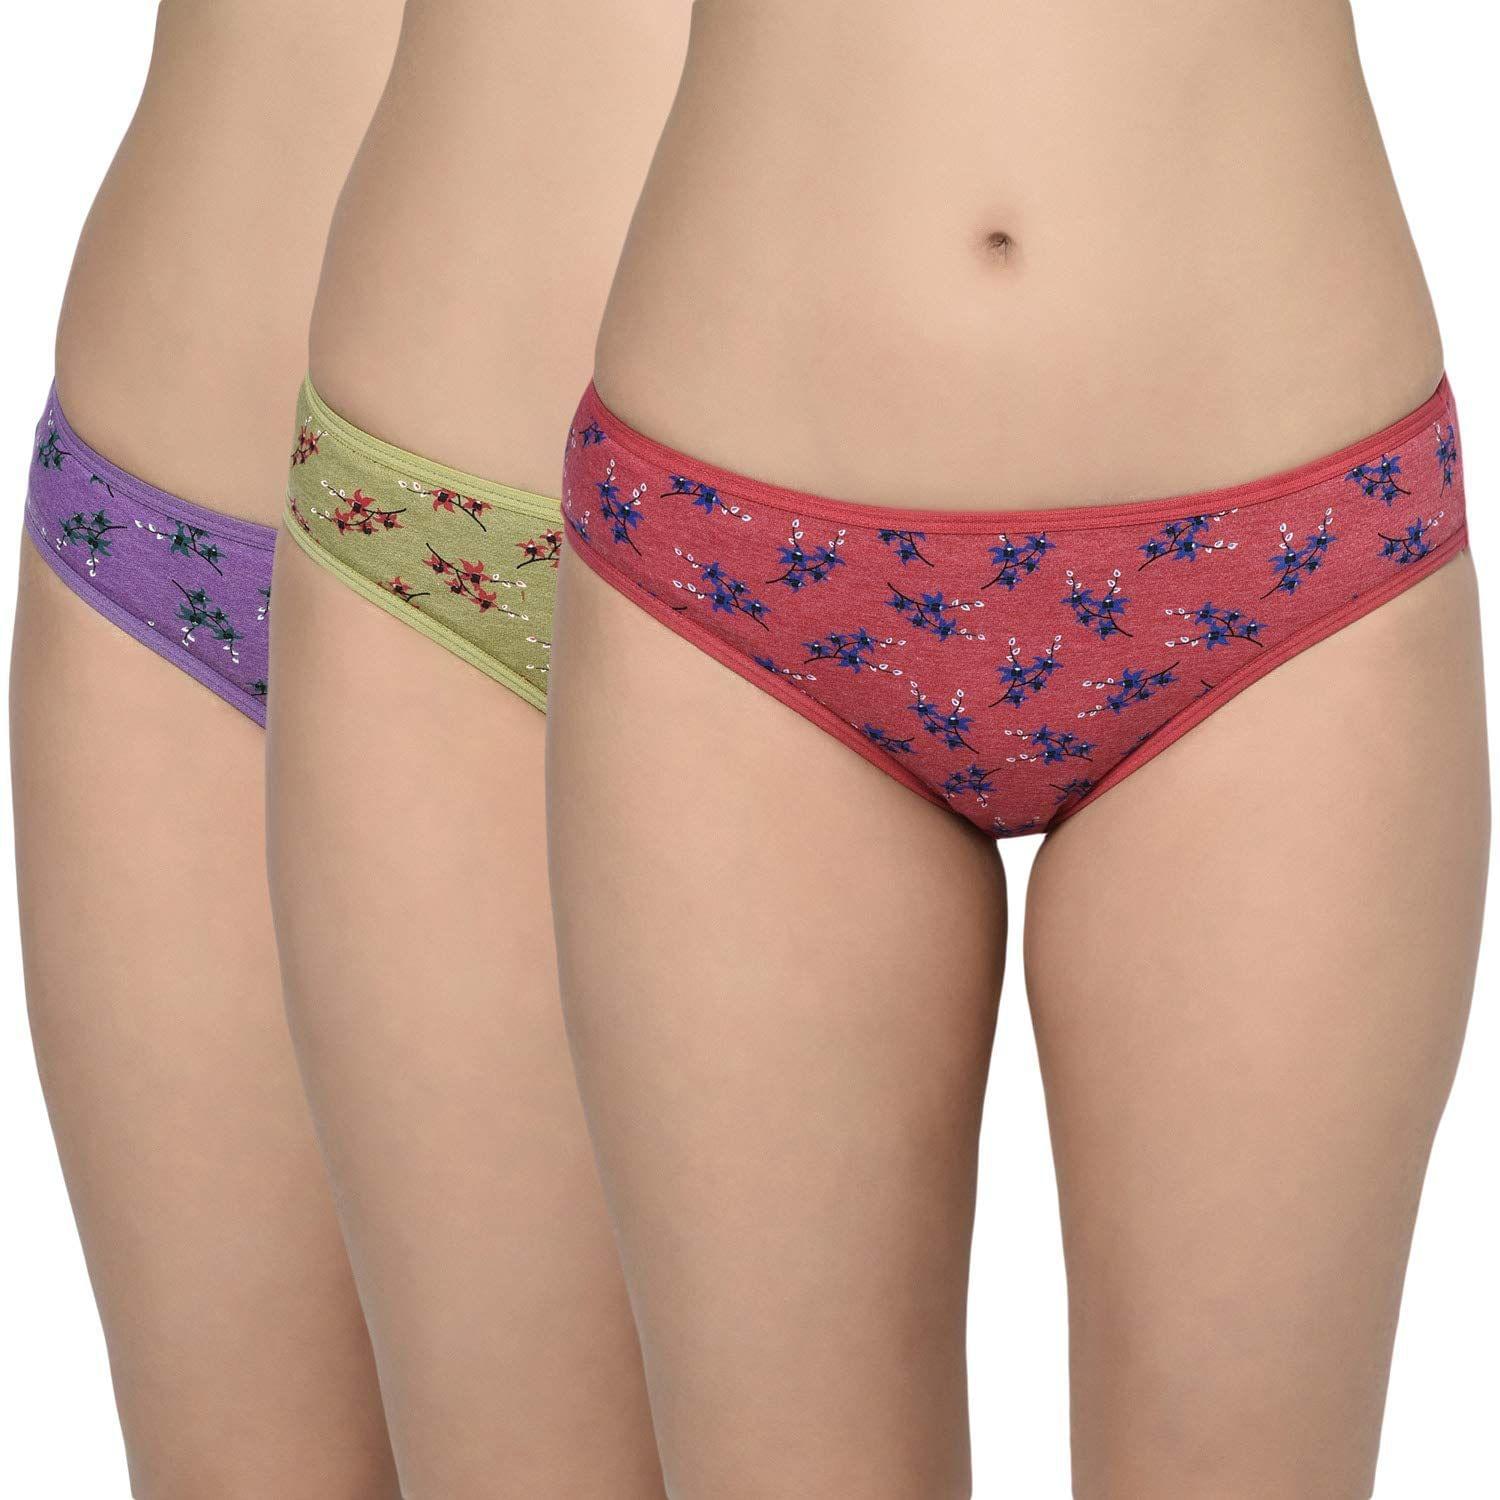 Bodycare Pack Of 3 Printed Panty In Assorted Colors-8516b-3pcs